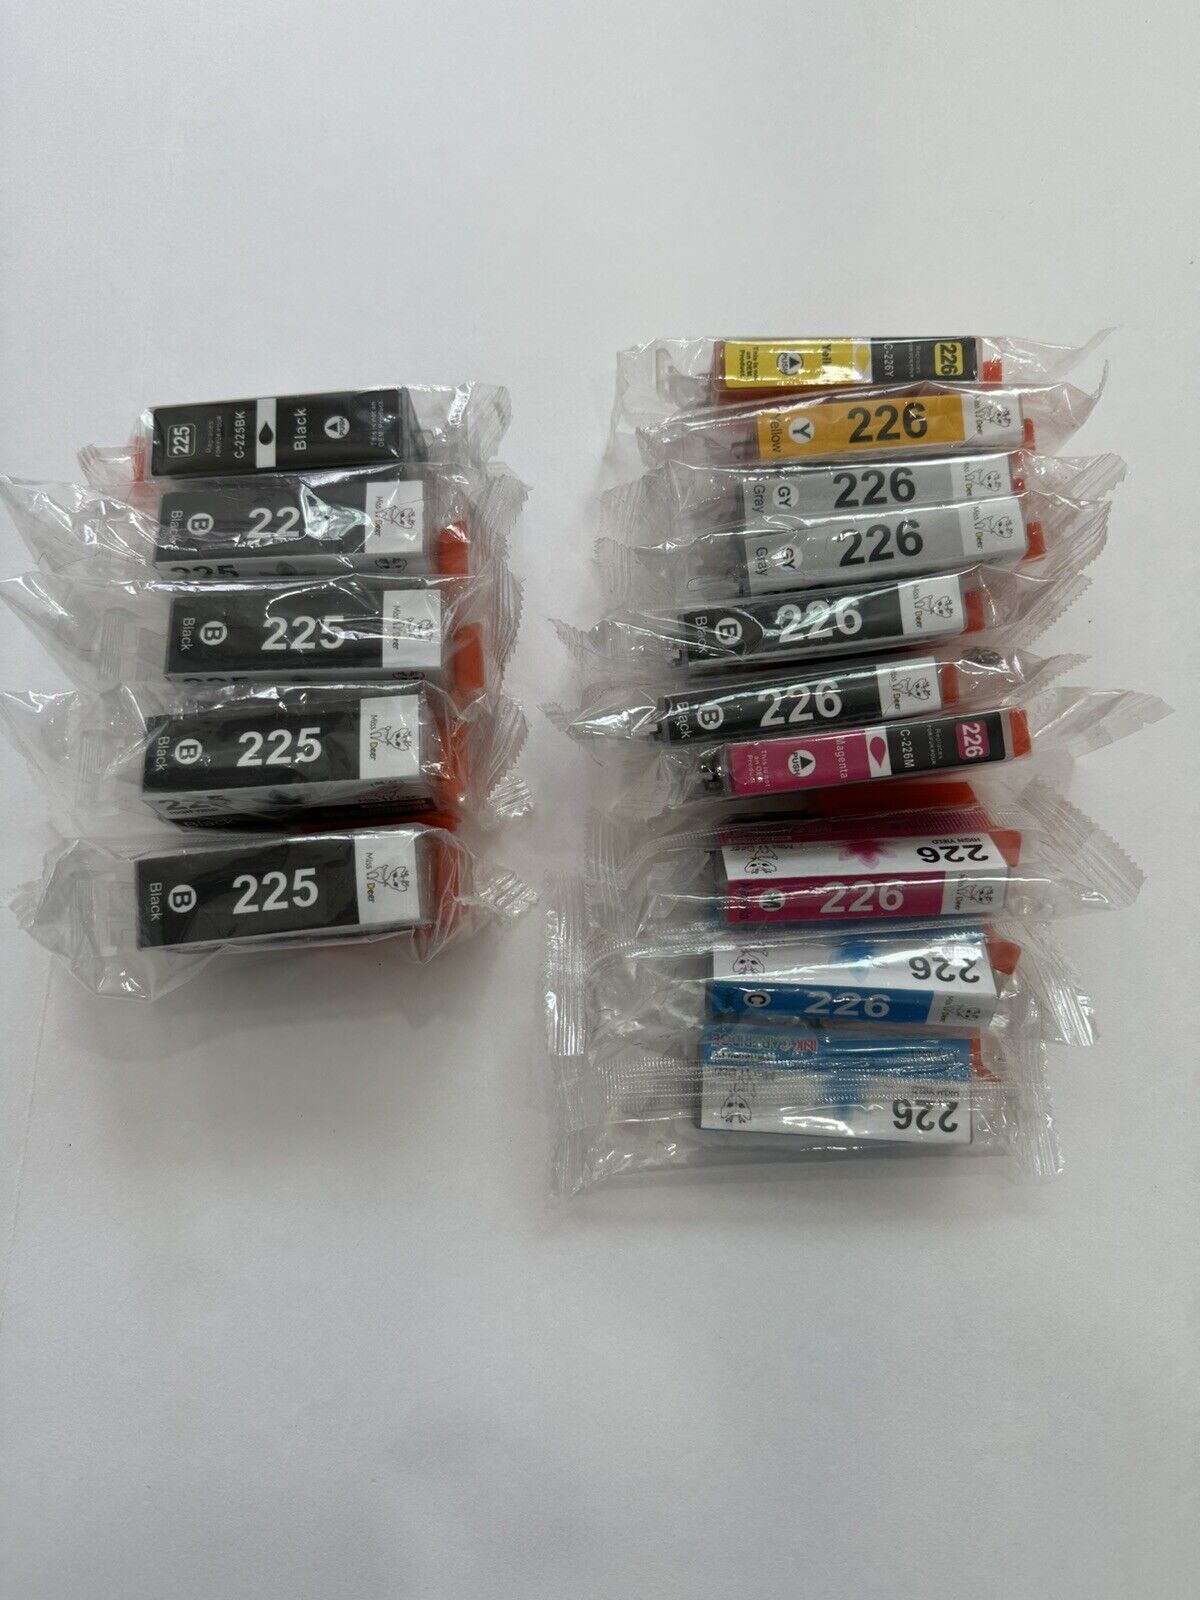 Lot Of 15 High Performance Ink Cartridges For Cannon 225/226.